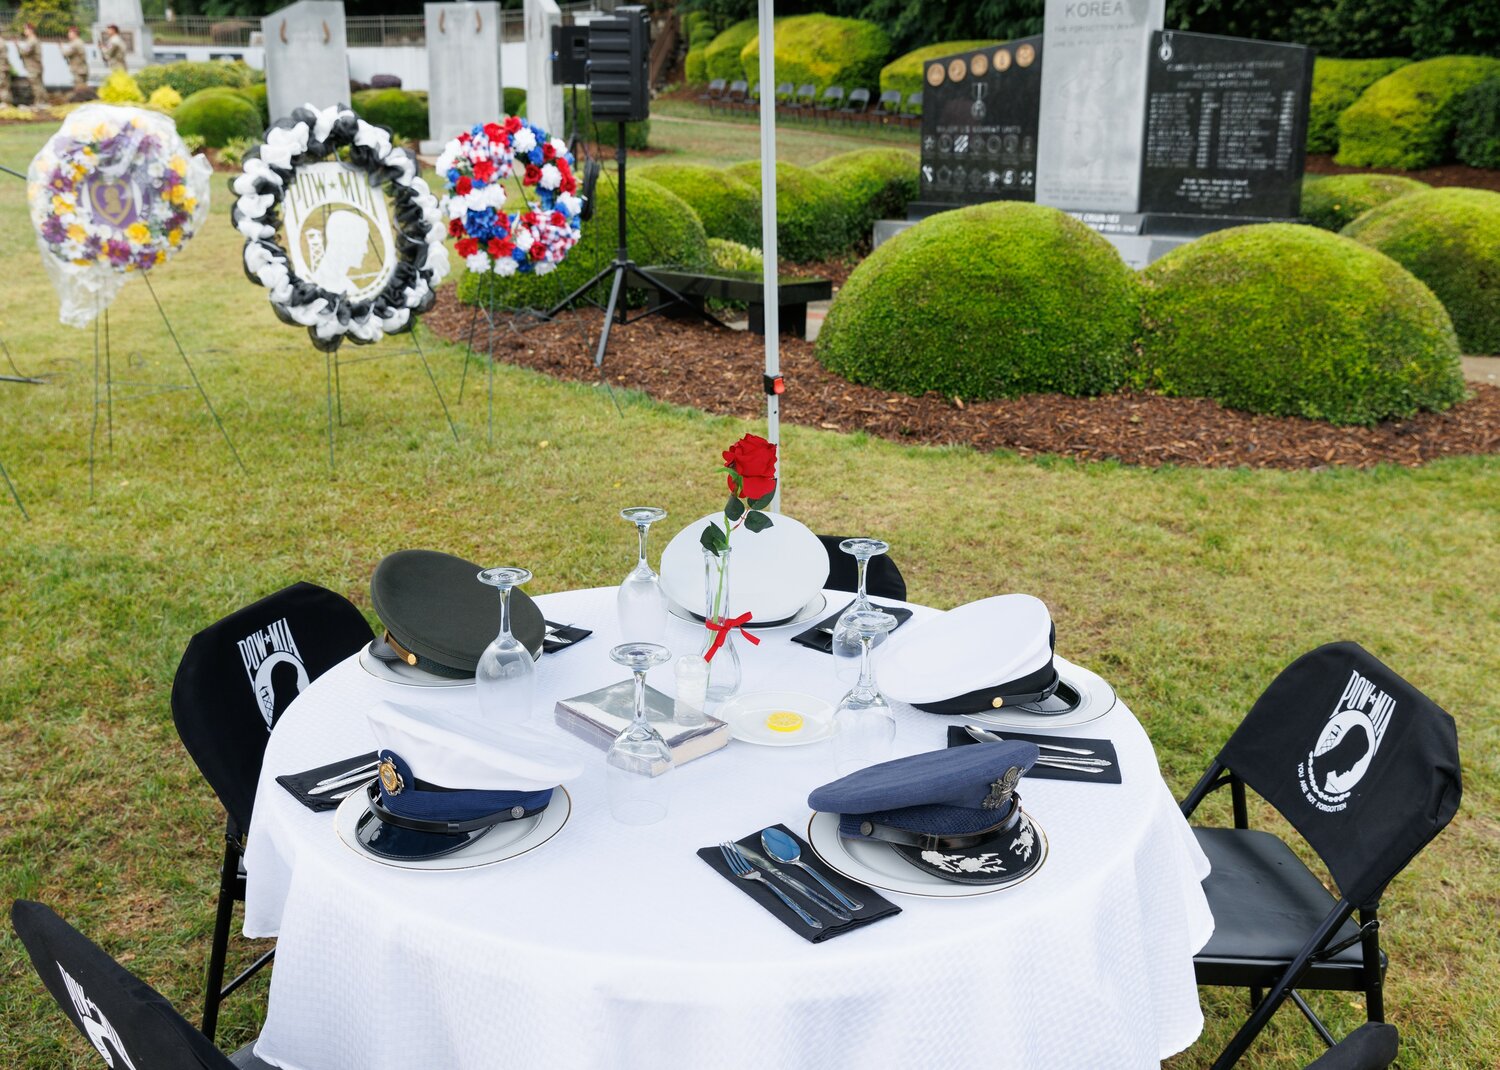 Members of Rolling Thunder NC Chapter 1 made a 'missing man' table presentation during the annual Memorial Day ceremony at Freedom Memorial Park on Monday.